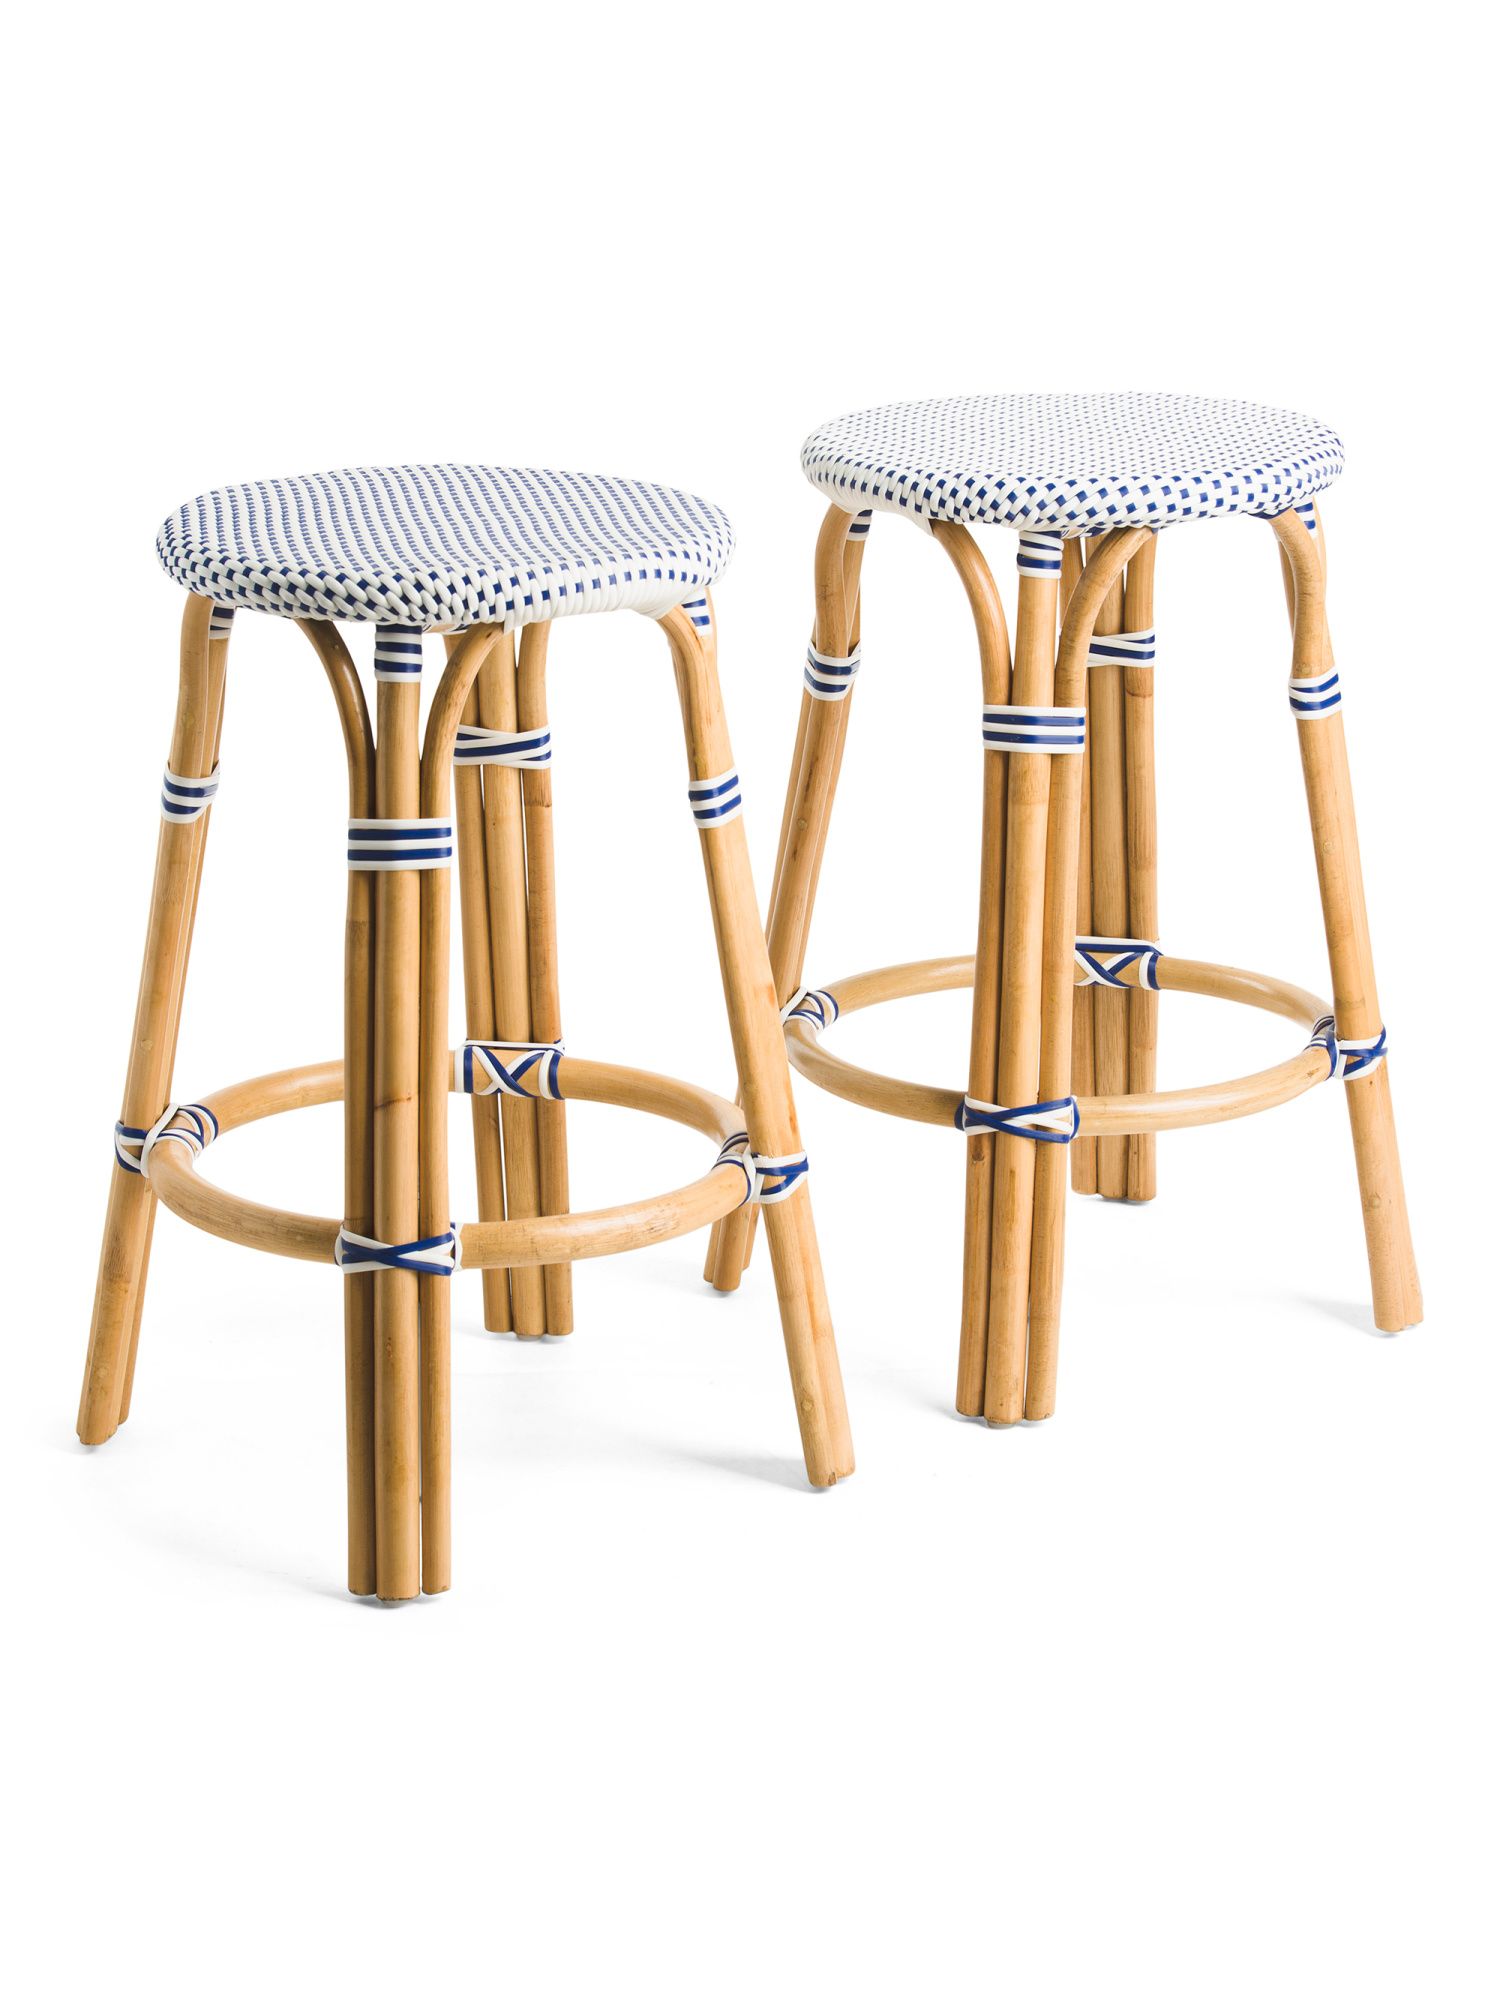 Set Of 2 Indoor Outdoor Backless Bistro Counter Stools | TJ Maxx